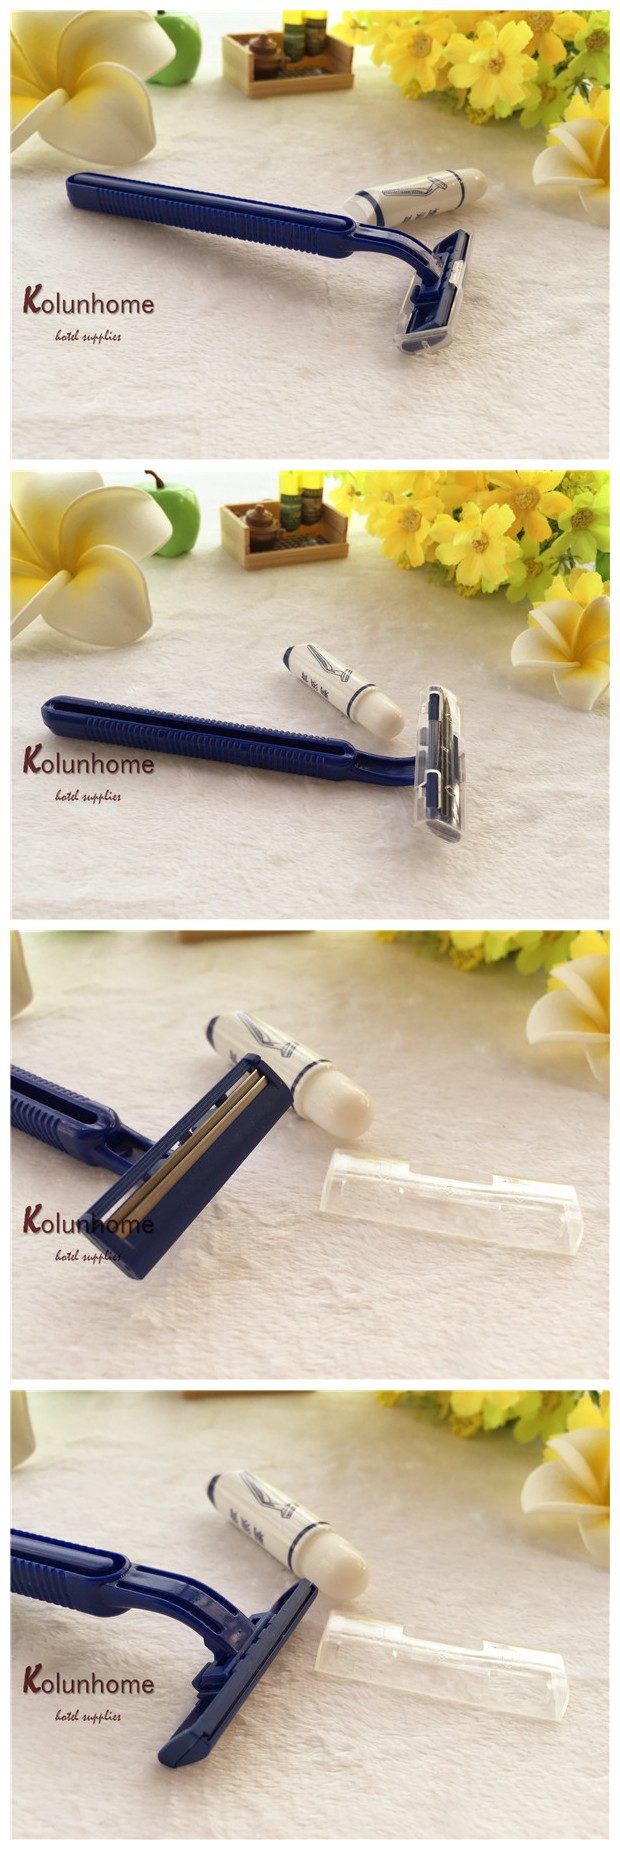 Disposable plastic shaving kit with carbon blades